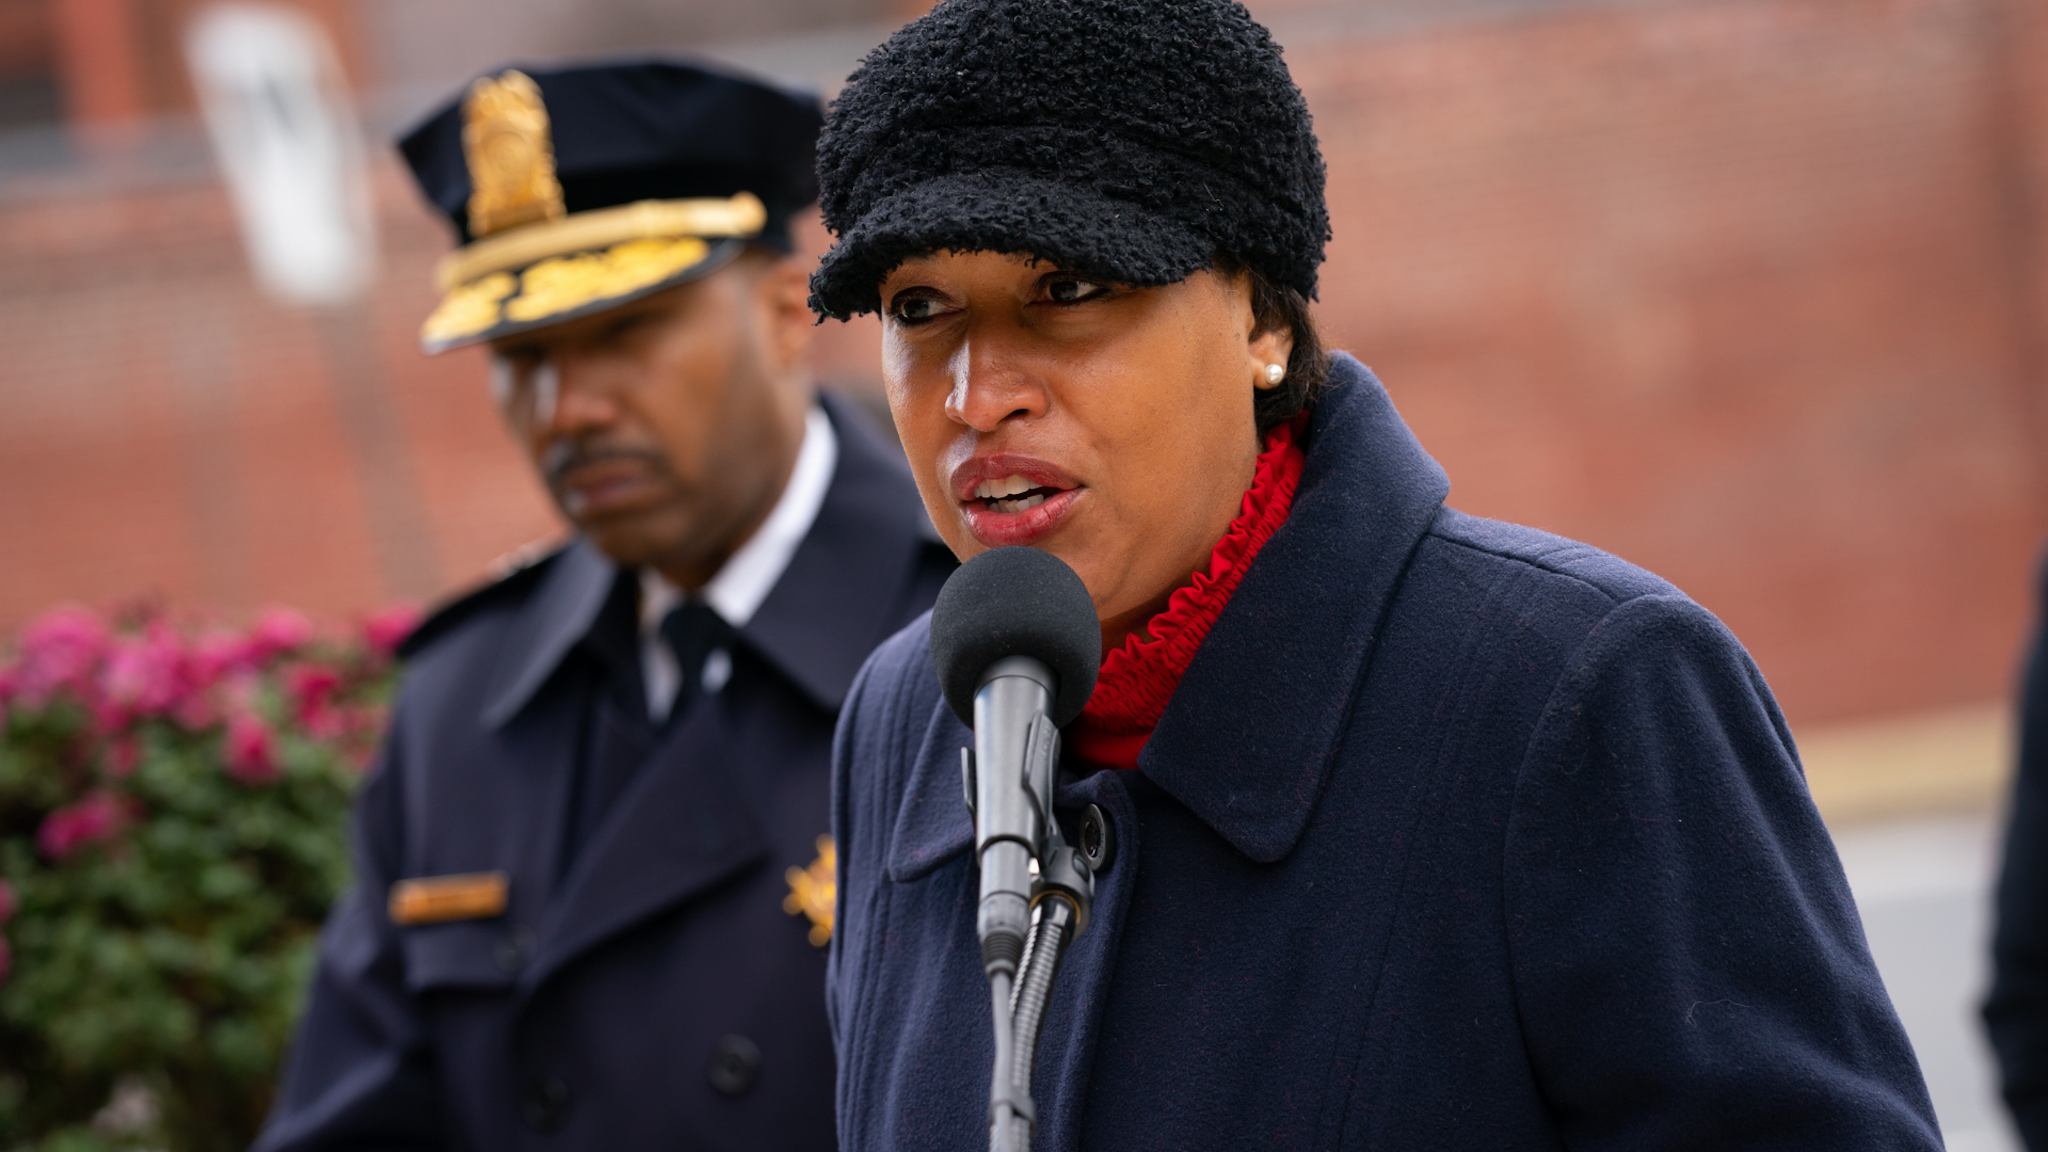 Mayor Muriel Bowser, pictured, held a press conference on Monday, November 29, 2021 with Chief Robert J. Contee, III, left, of the Metropolitan Police Department, and Lewis Ferebee, Chancellor, DC Public Schools to announce new traffic safety enhancements in areas around schools in the District of Columbia